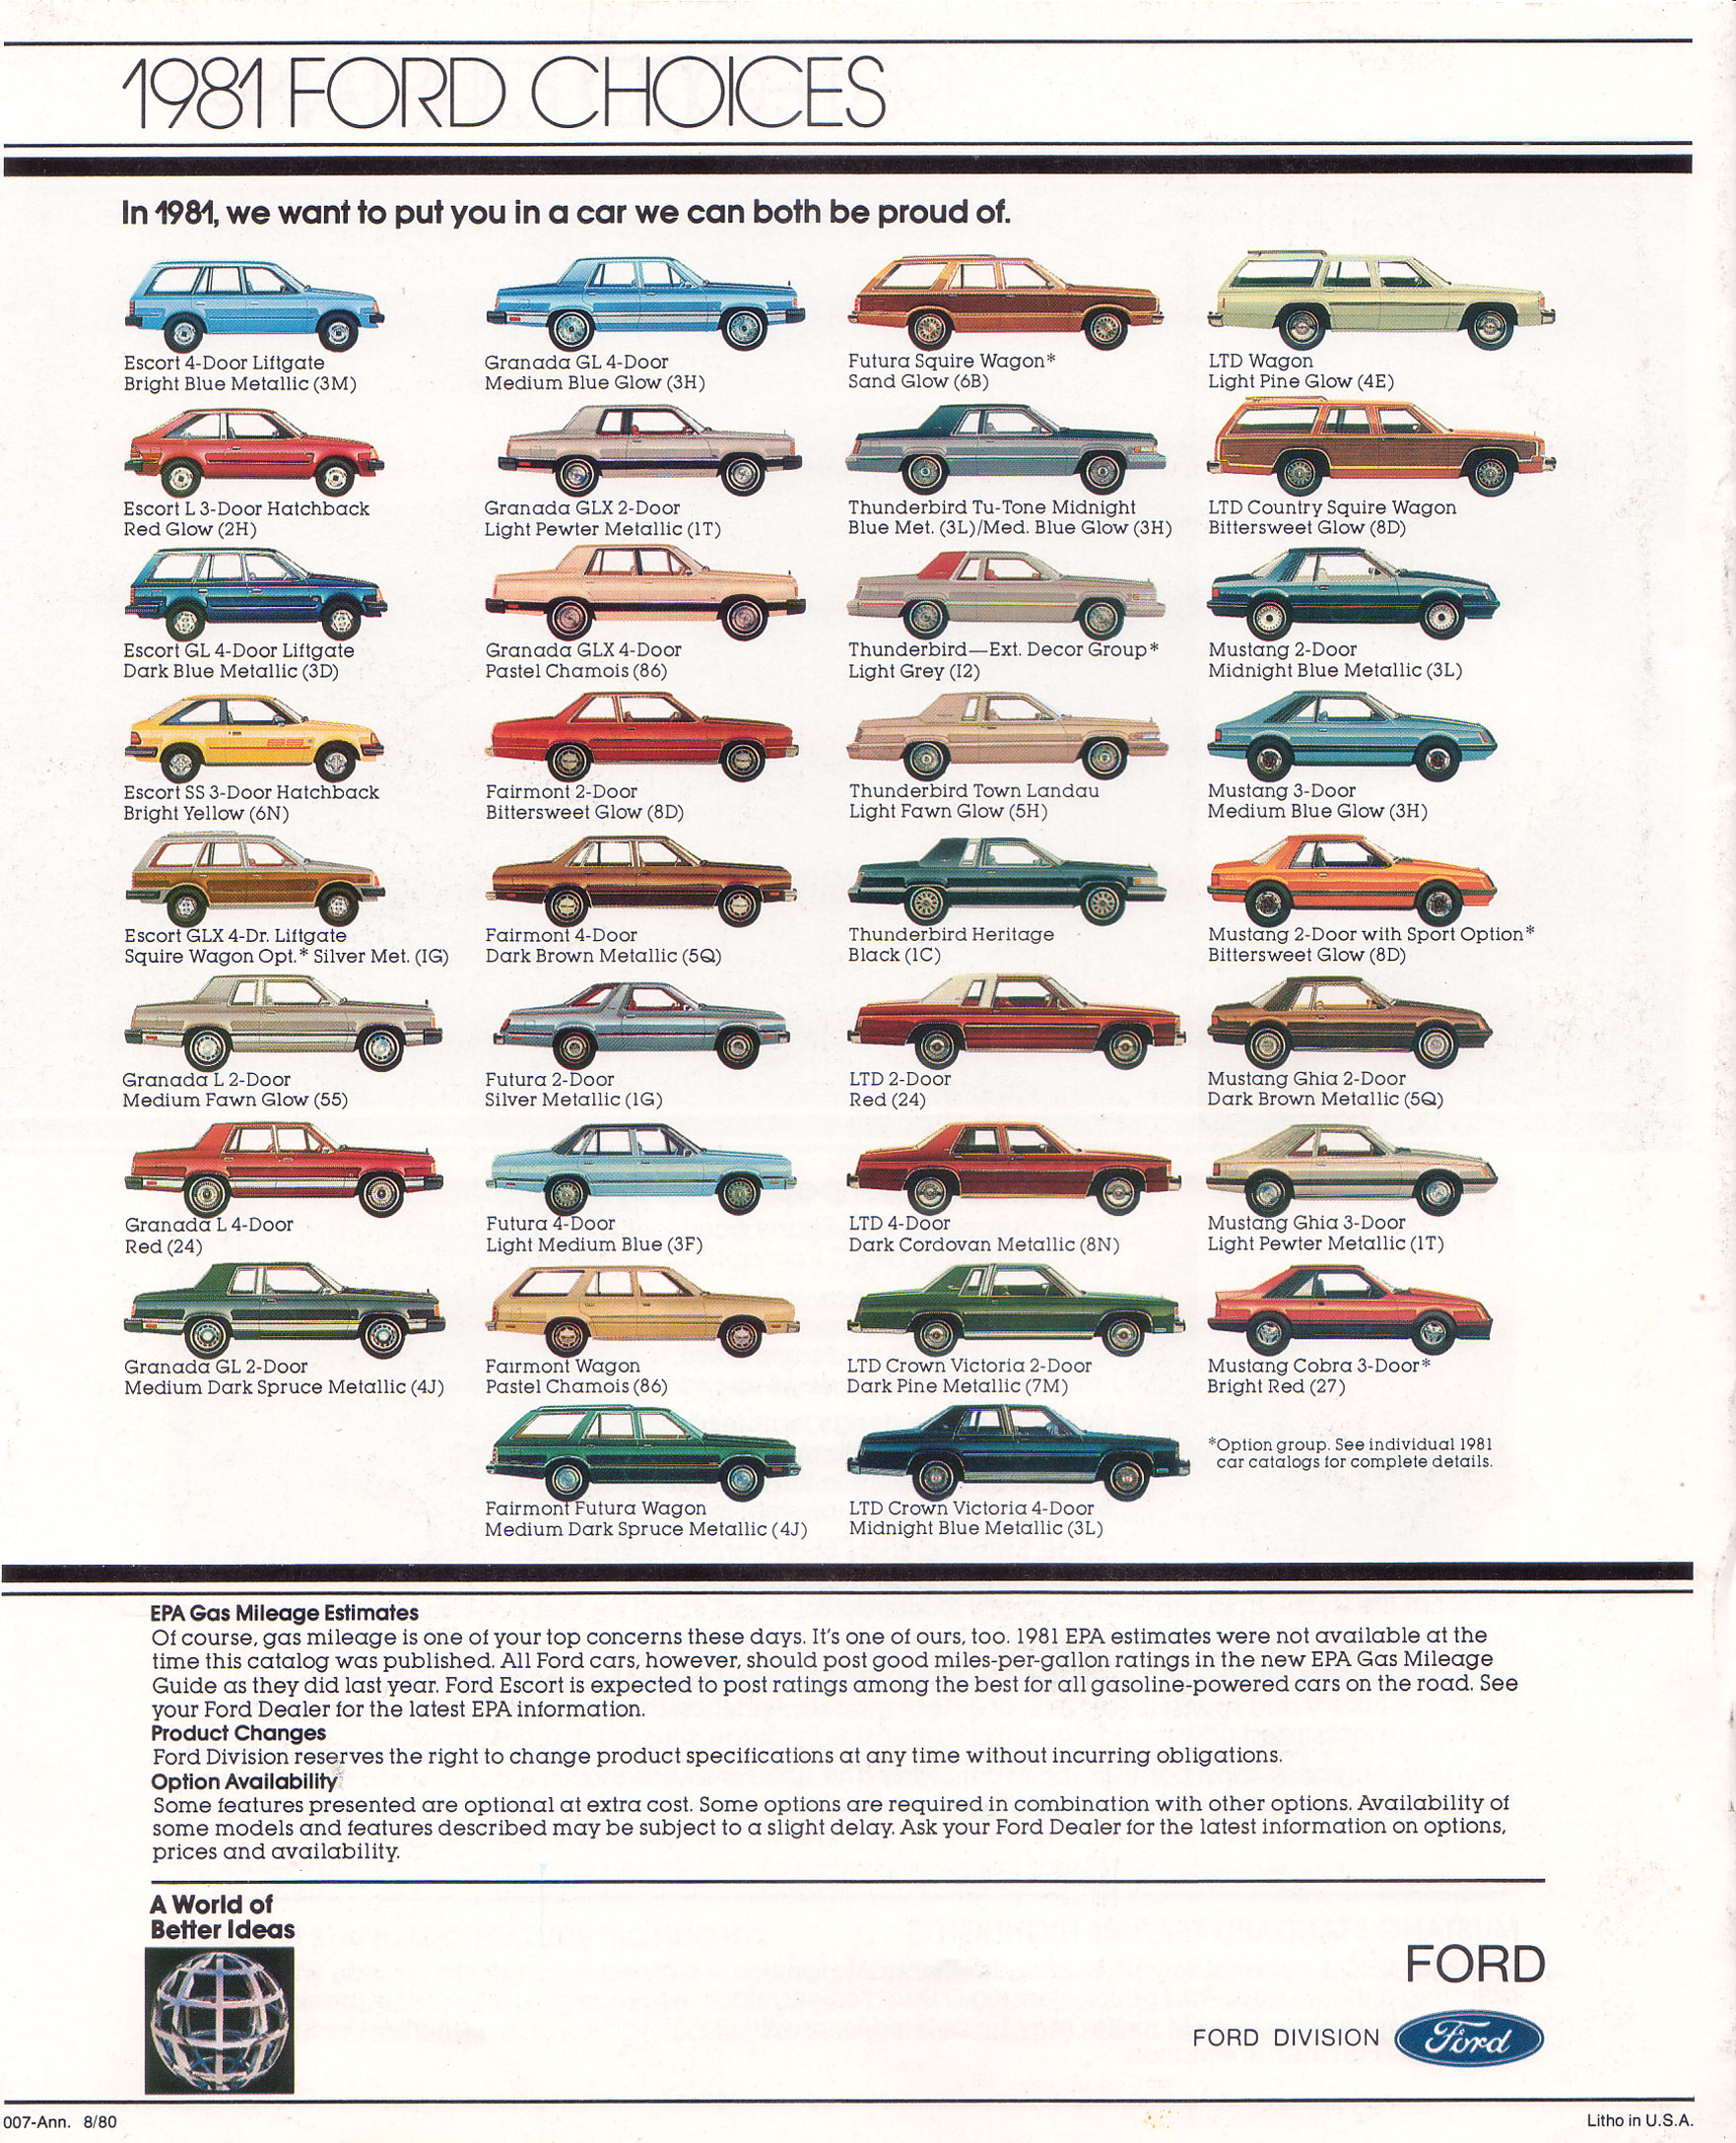 1981 Ford A World Of Better Ideas Brochure Page 5